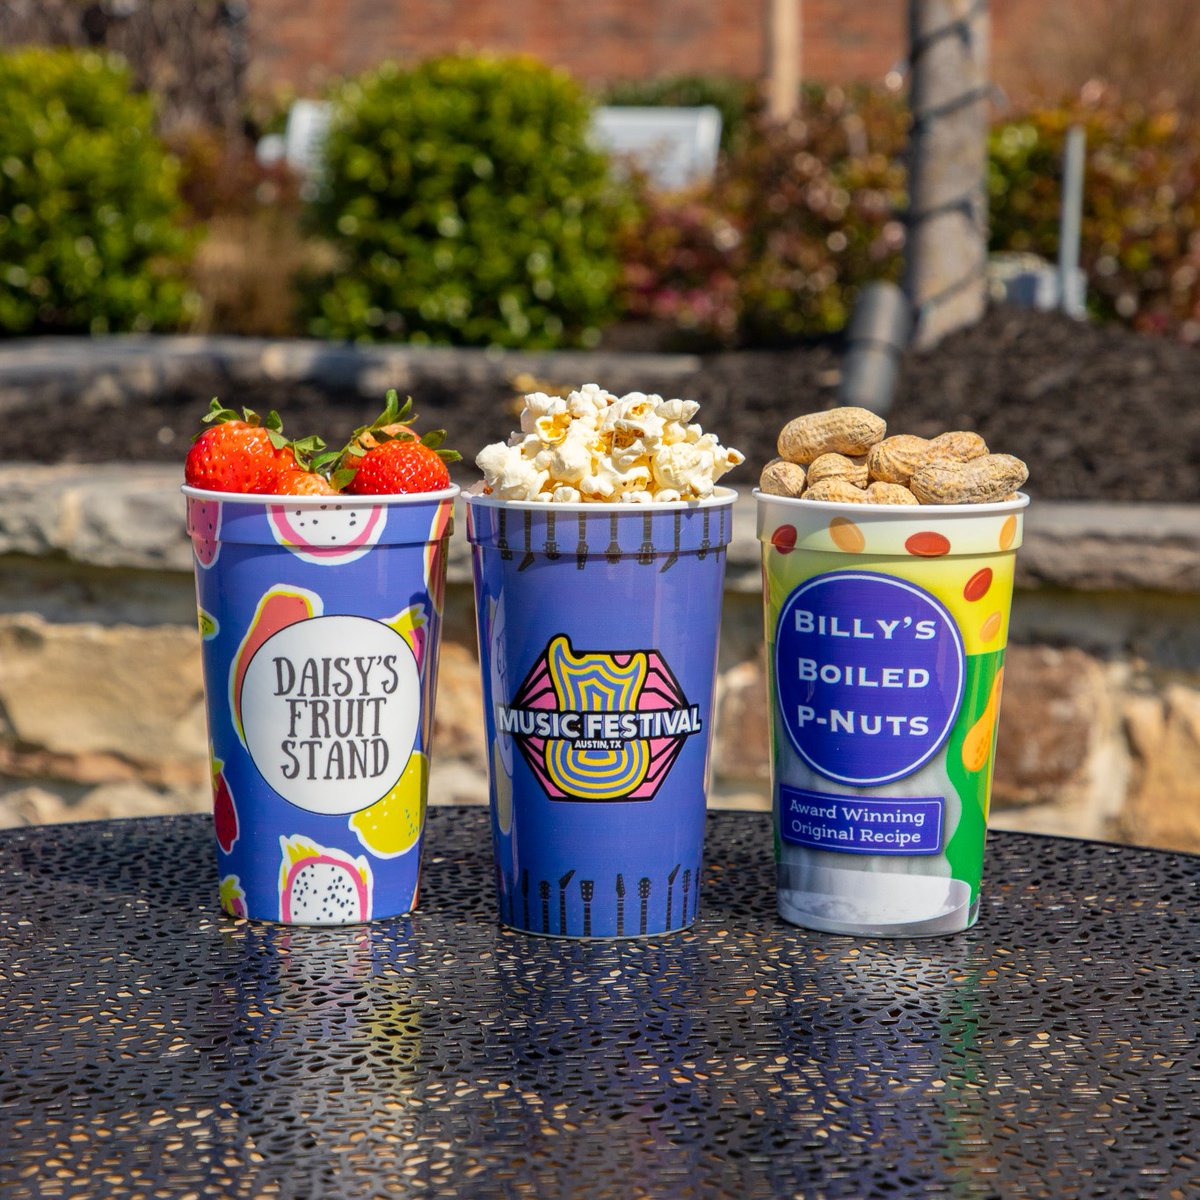 Brand your business or event with bold full-color, full-wrap printing on our 22oz and 32oz custom stadium cups! 🤩 

Shop custom stadium cups today and elevate your branding: radixbrandingsolutions.com/drinkware/stad…

#businessowner #businessbranding #eventbranding